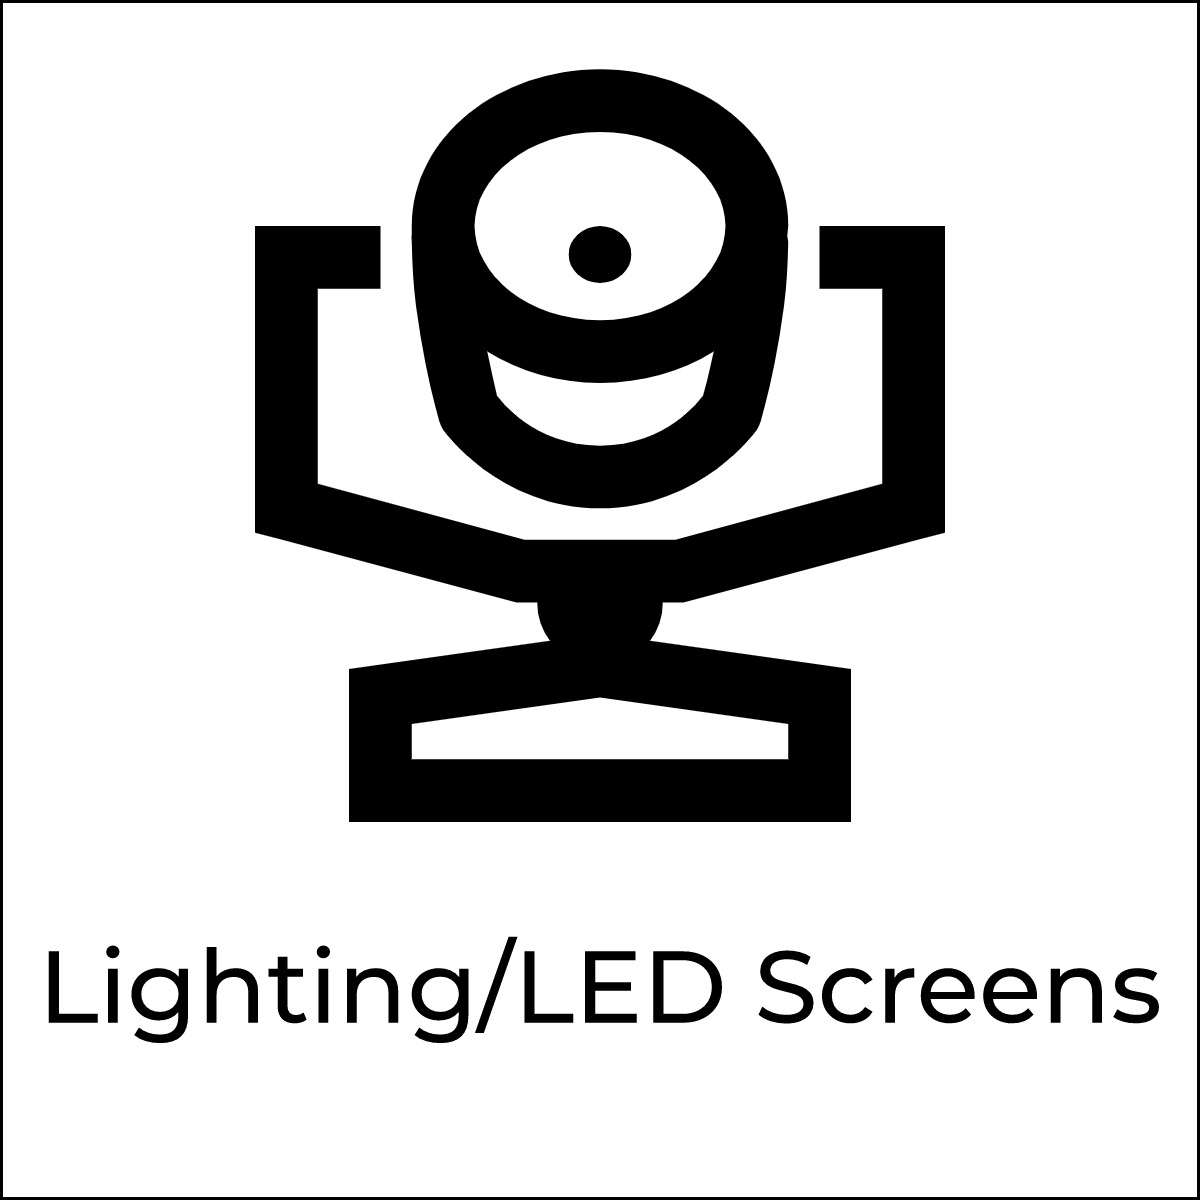 Lighting services image